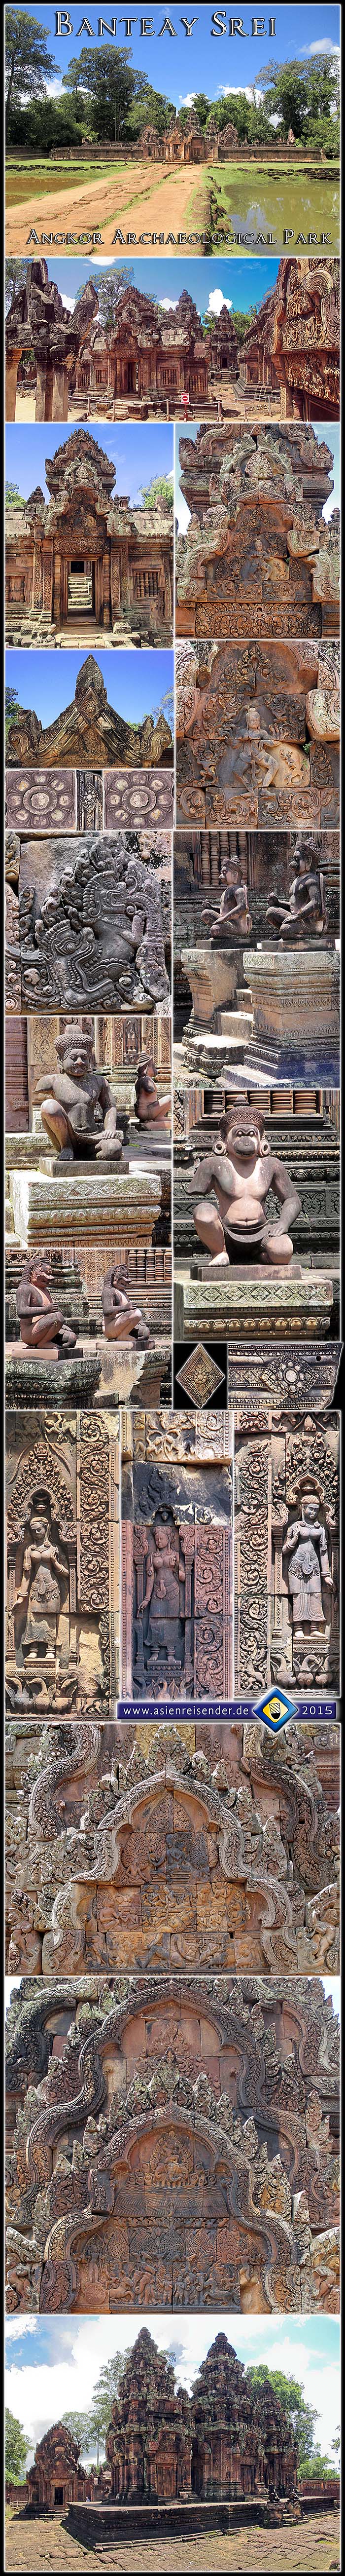 'Photocomposition Banteay Srei' by Asienreisender